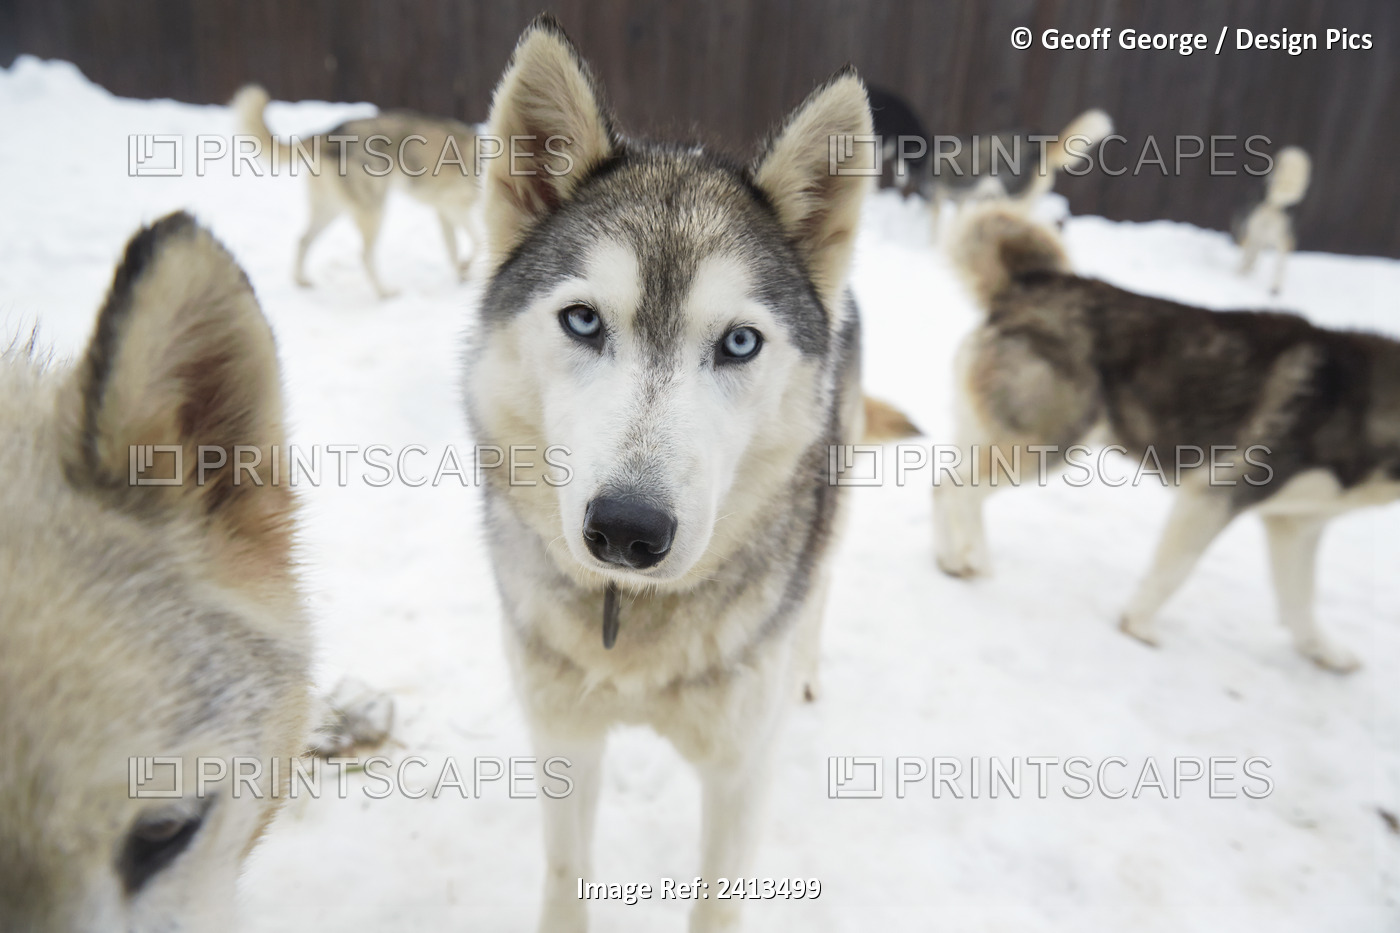 Sled Dogs At The Haliburton Forest And Wildlife Reserve; Ontario, Canada